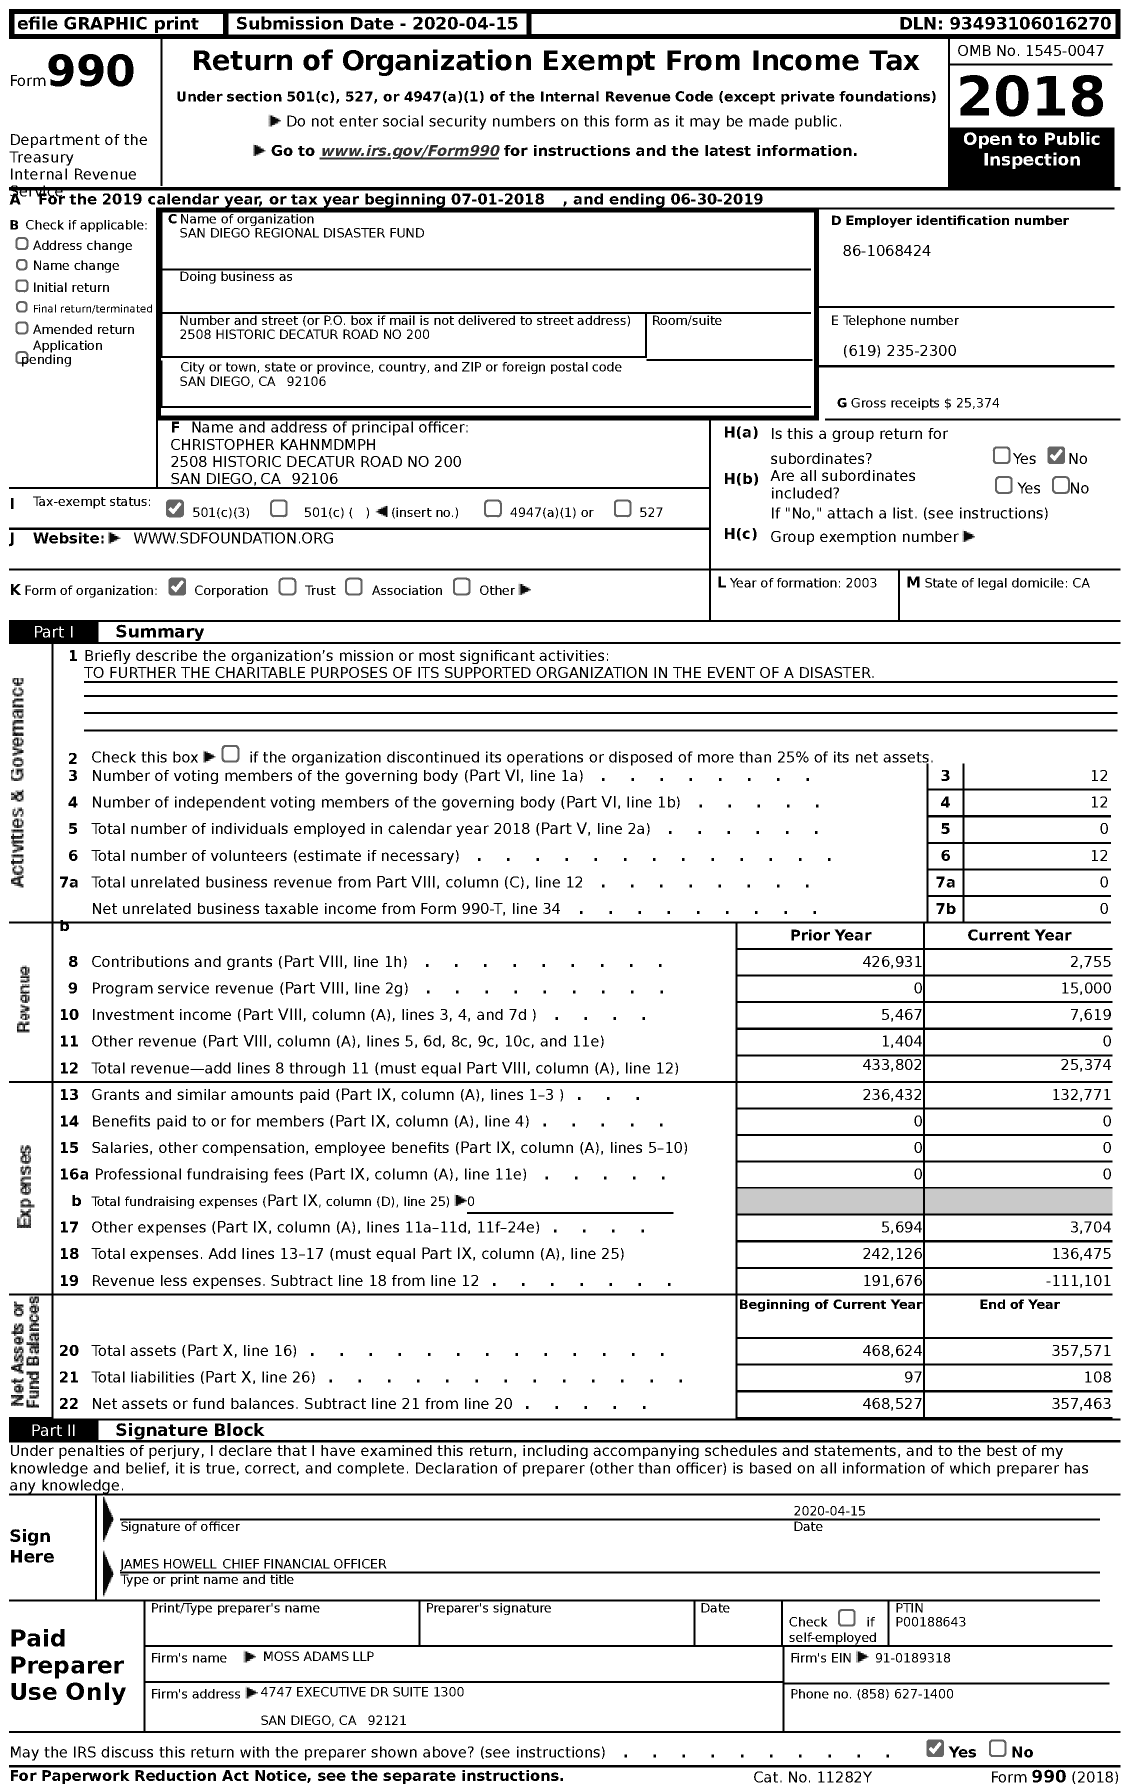 Image of first page of 2018 Form 990 for San Diego Regional Disaster Fund